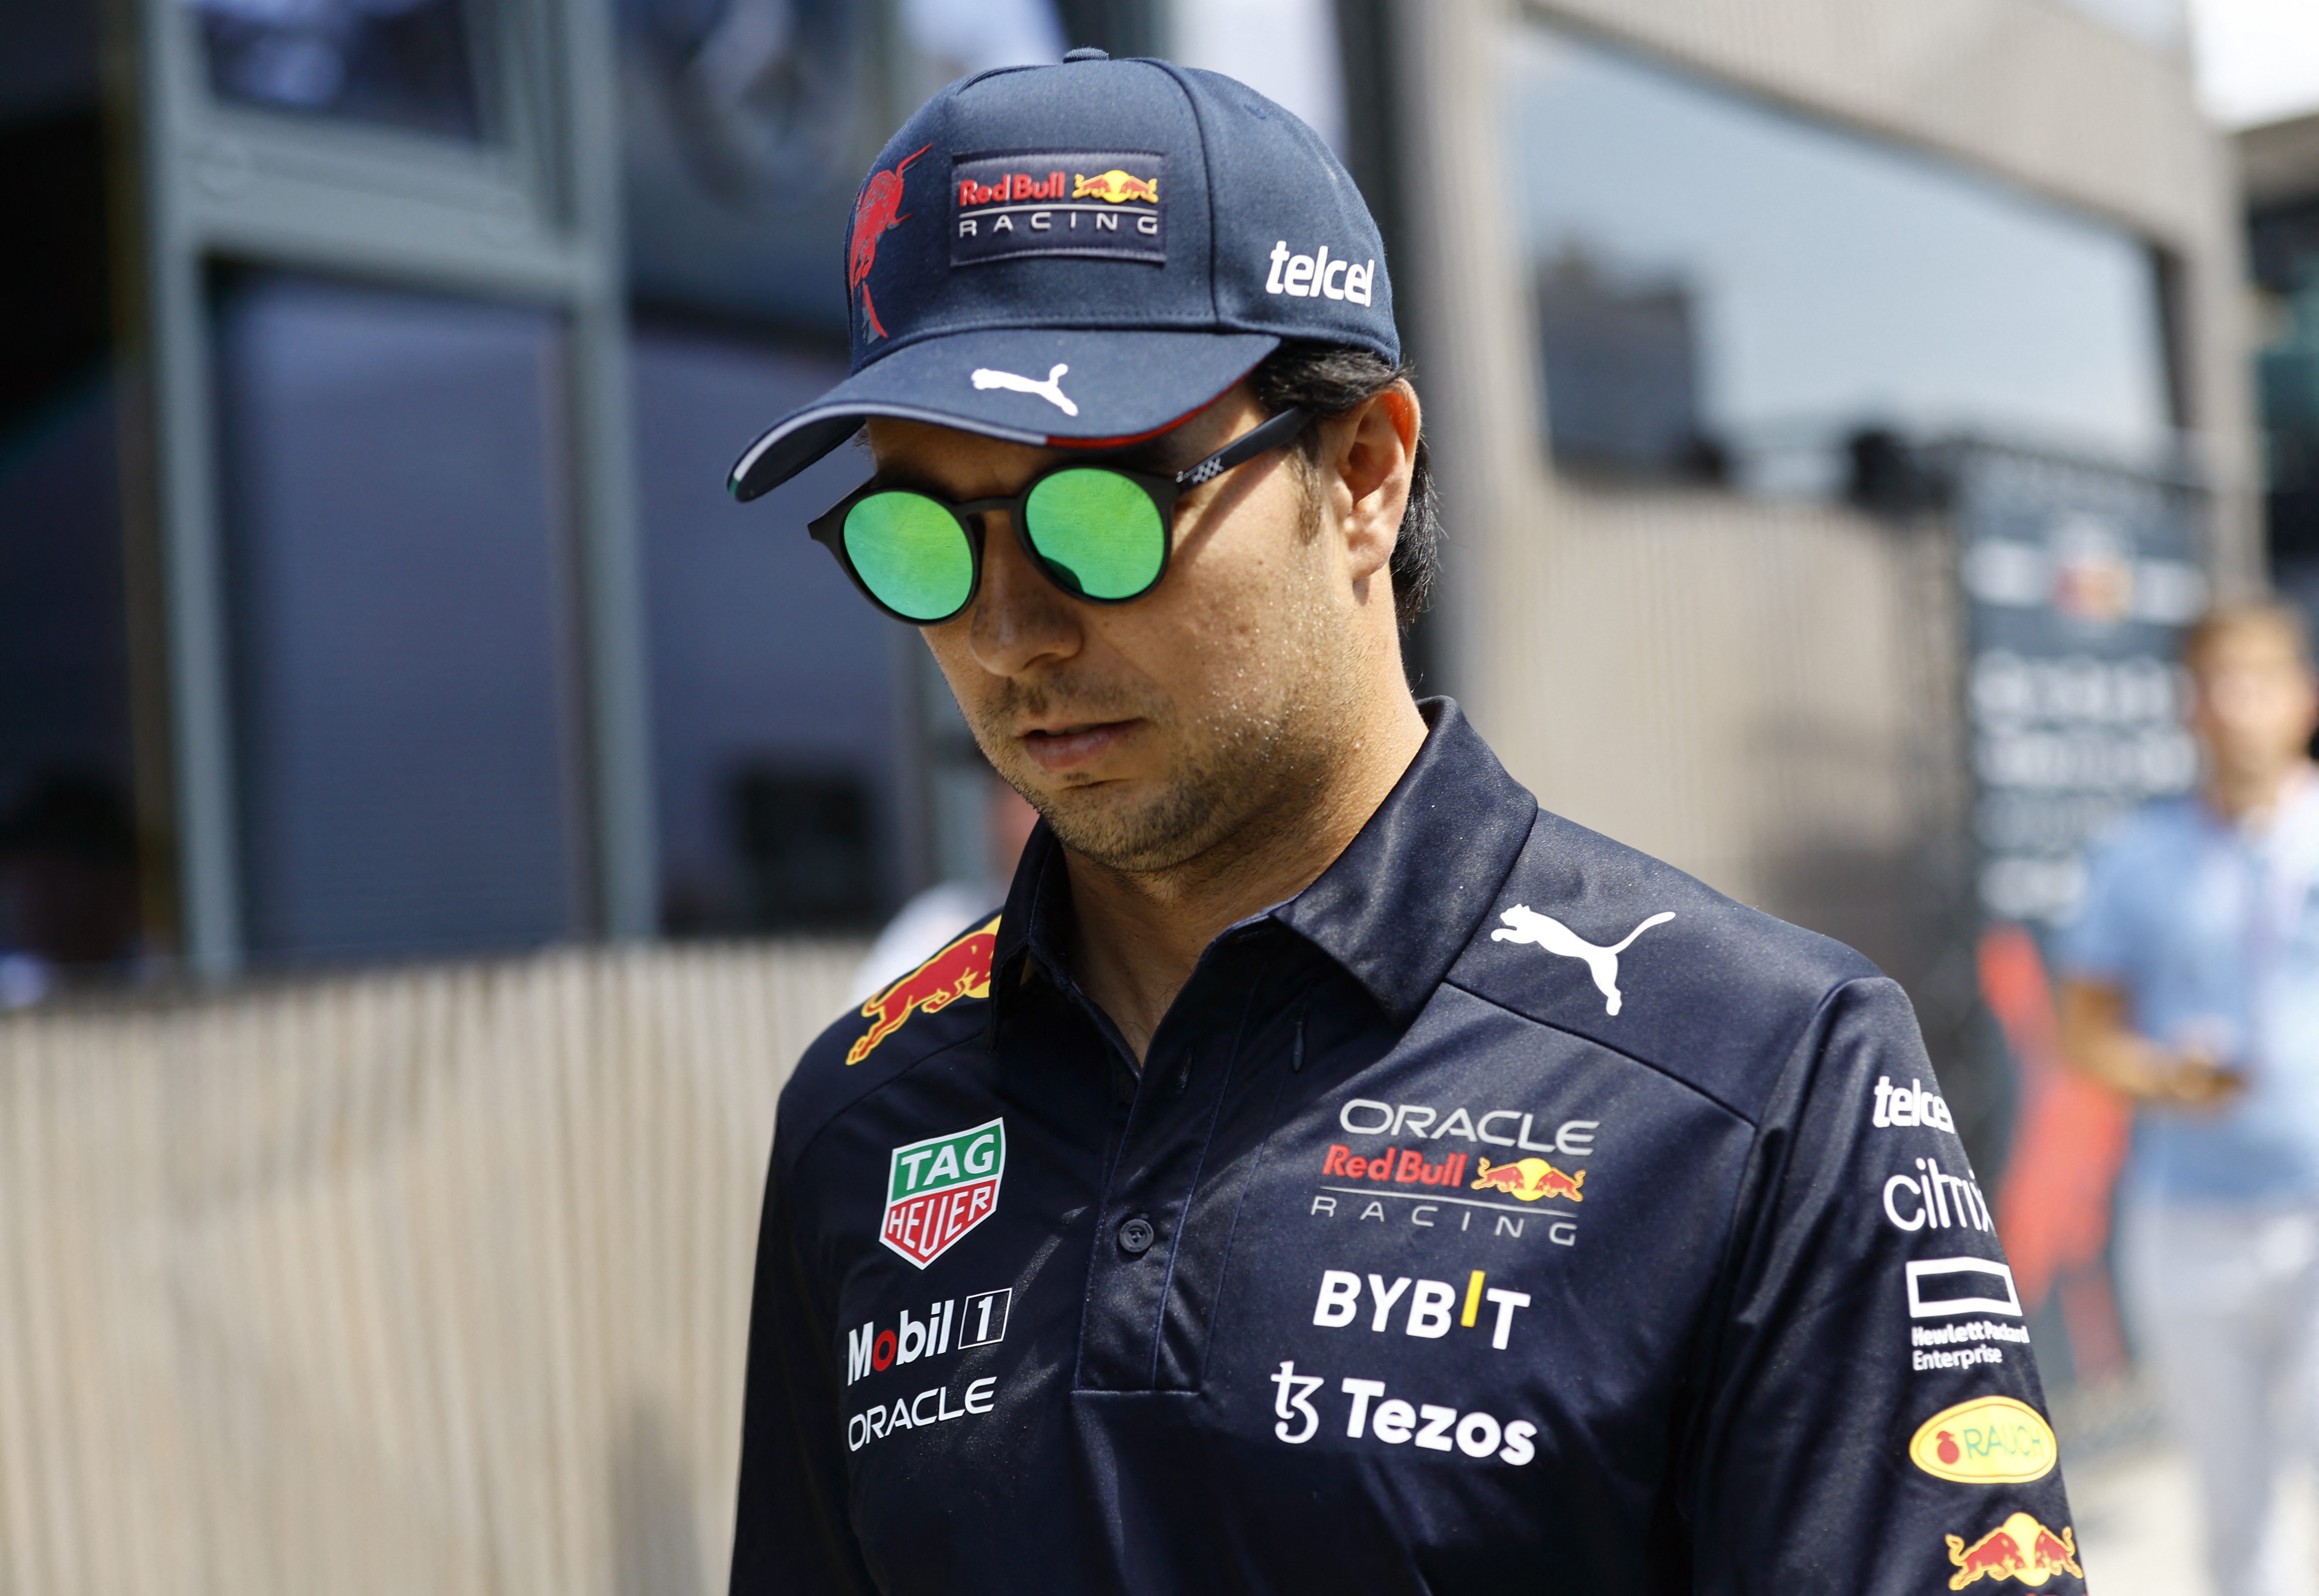 Checo Pérez went into the summer break 85 points below Max Verstappen and in an irregular state compared to the start of the season (Photo: REUTERS/Lisa Leutner)